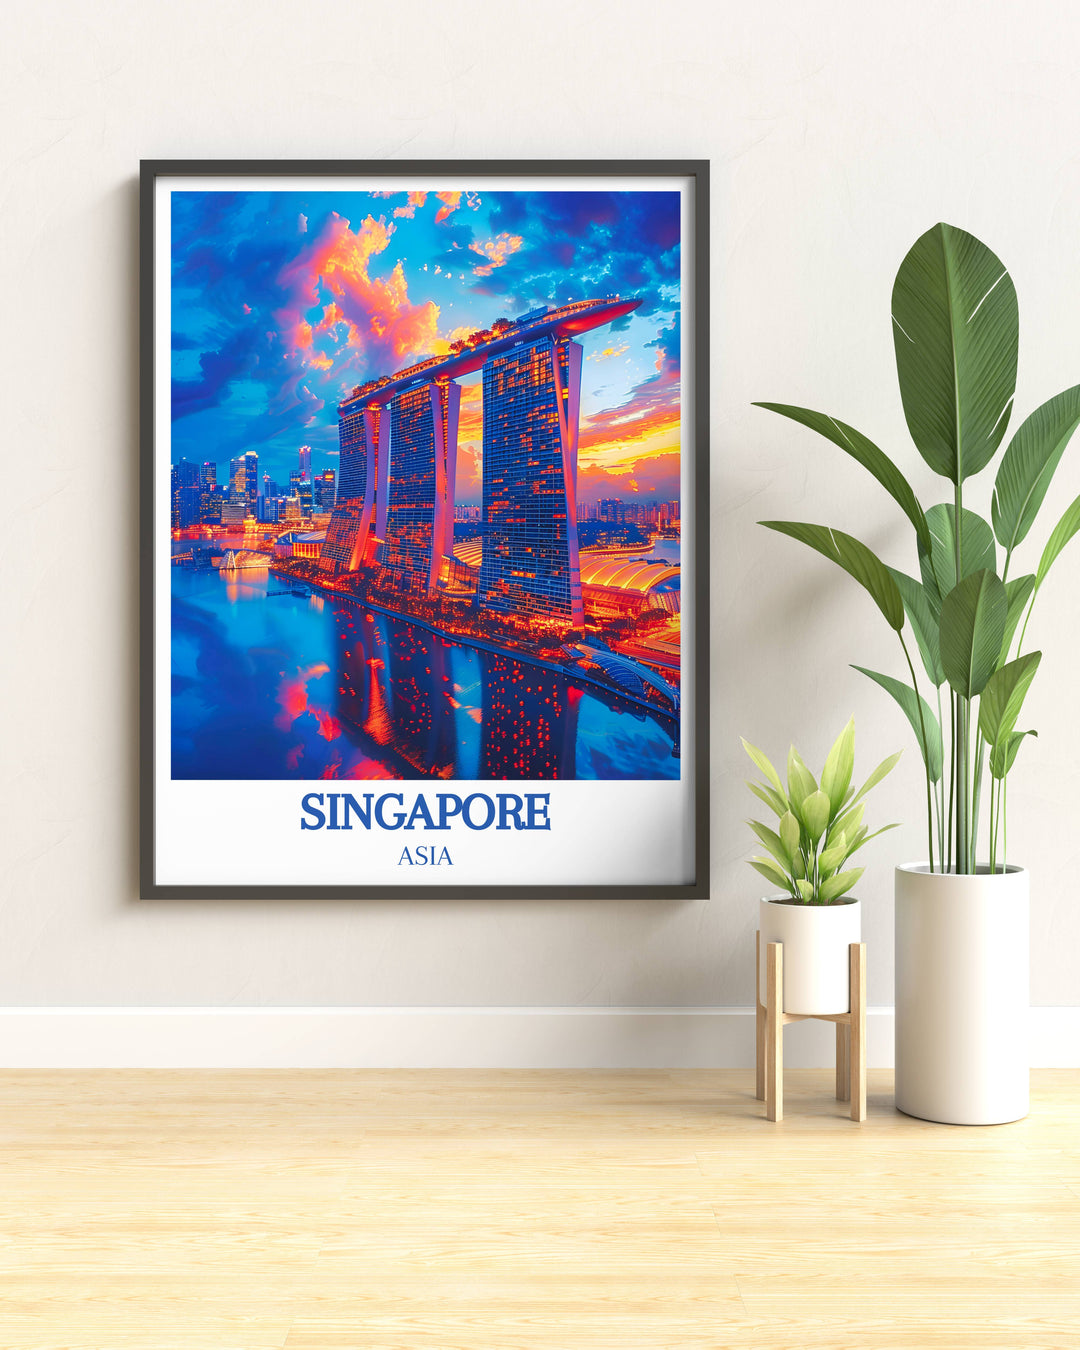 Sophisticated Marina Bay Sands decor piece highlighting the luxurious infinity pool, great for bringing a sense of relaxation and opulence to home interiors or hospitality settings.